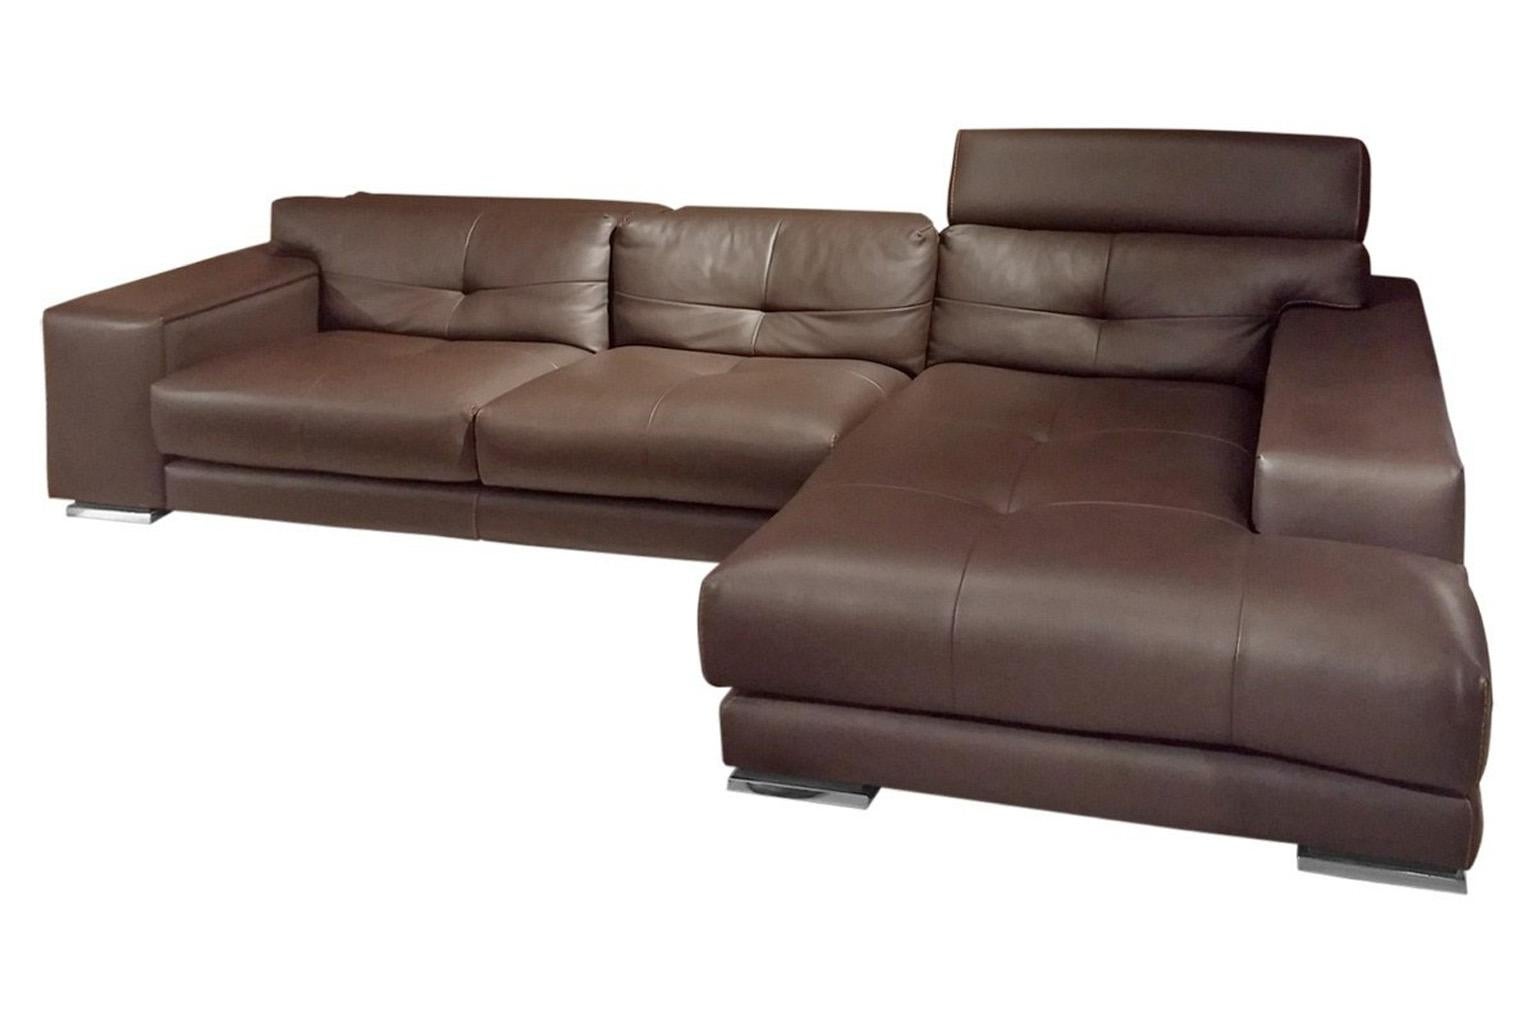 Leather sectional with Chaise in dark rich brown luxurious soft leather.
Top grain leather upholstery with contrast stitching.
Tufted cushions.
Special ratchet headrest cushion with polished chrome mechanism.
Chrome and wood